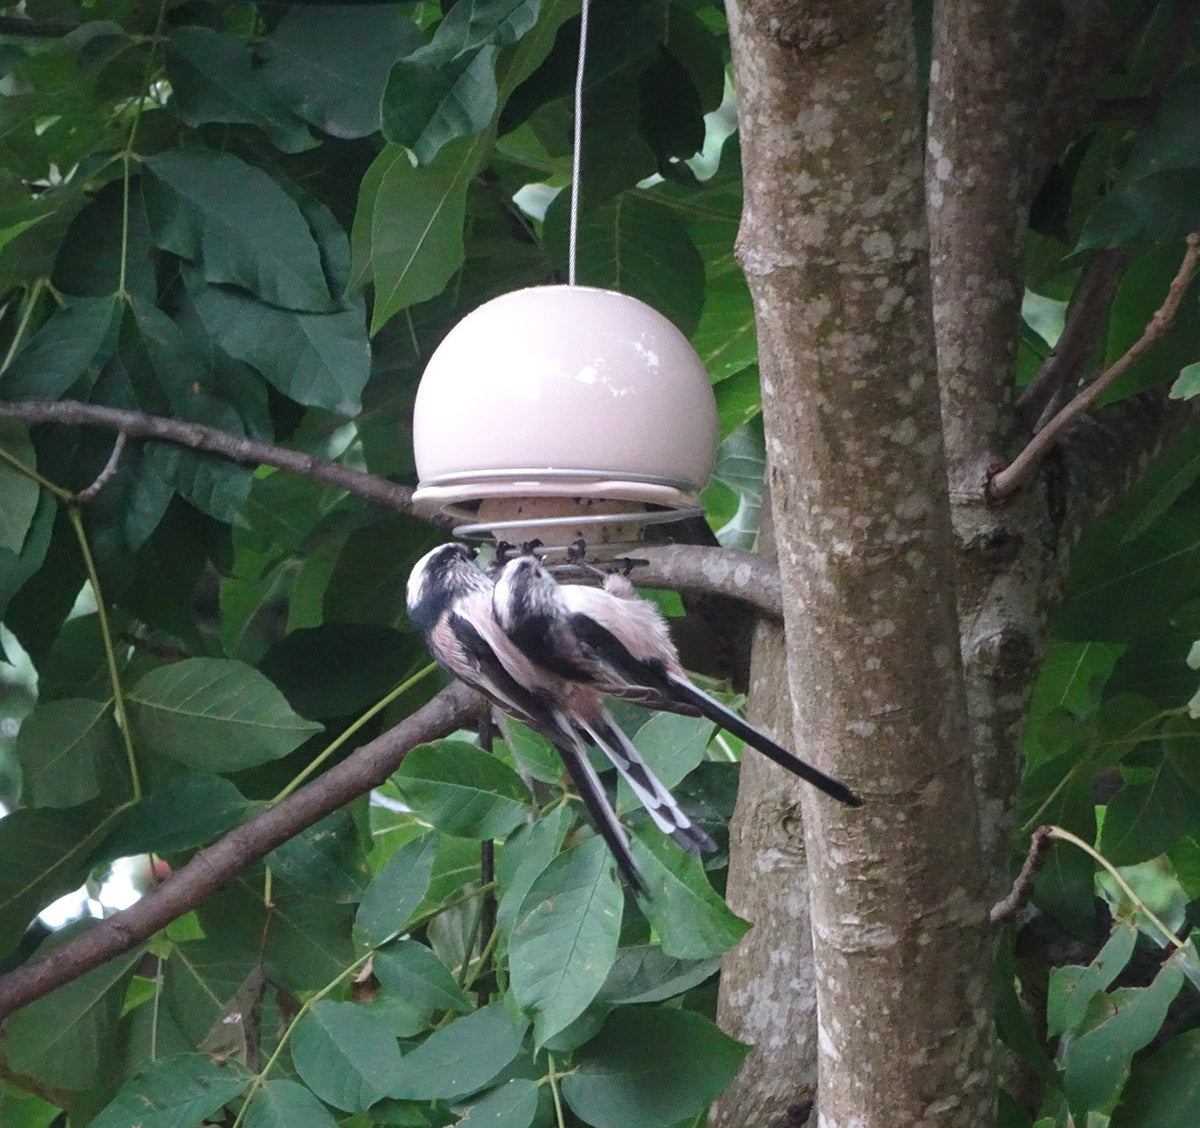 Long tailed tits on belle birdfeeder